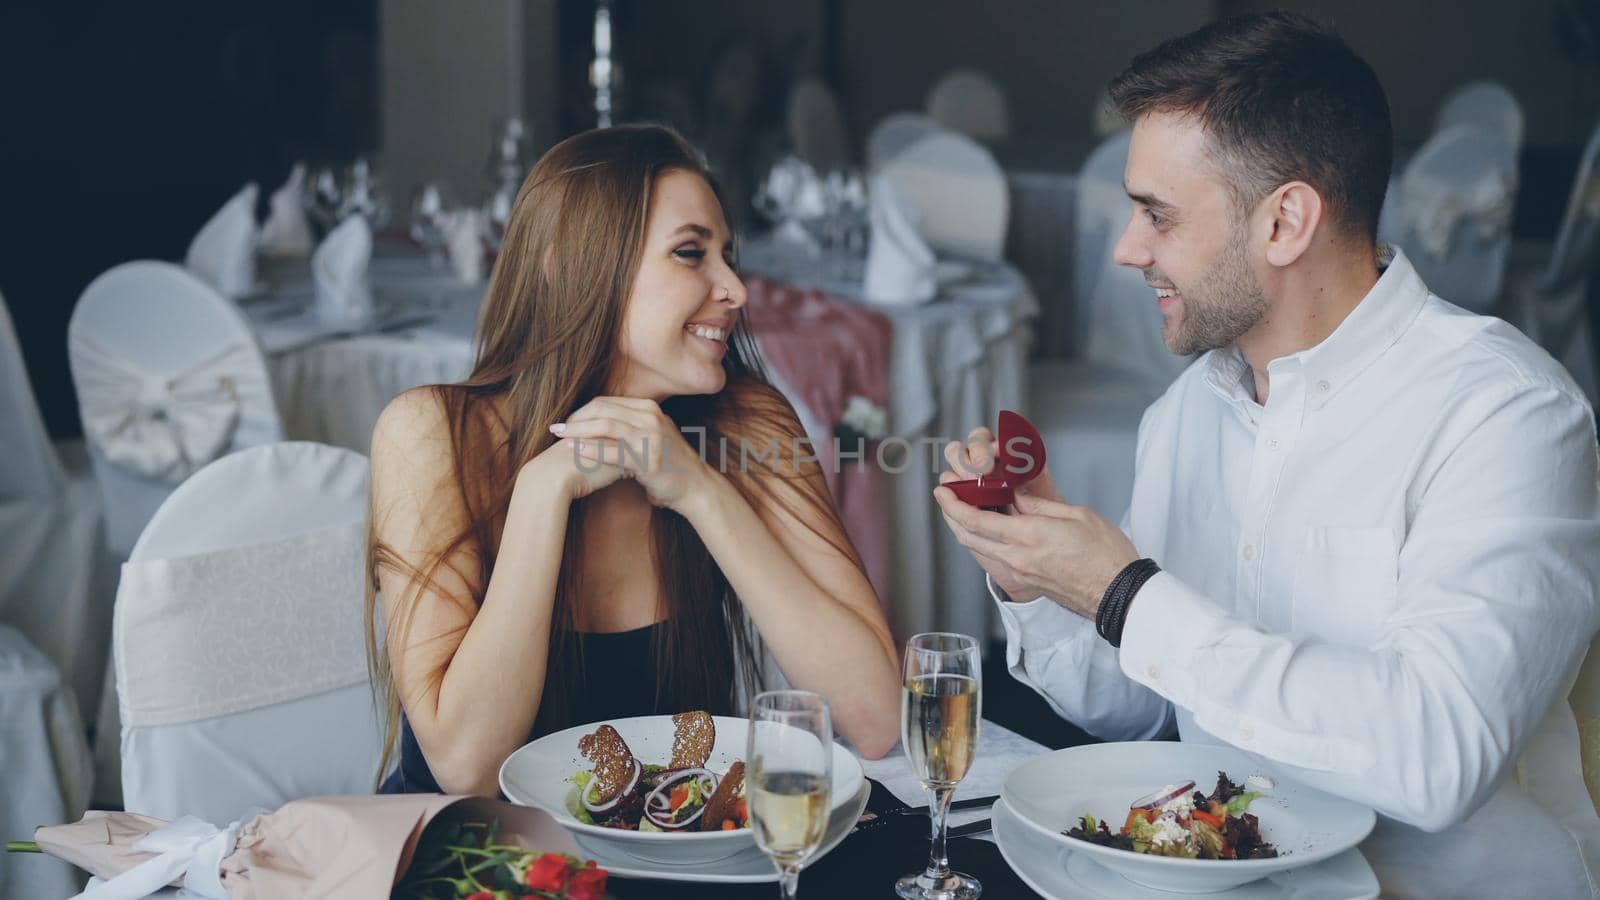 Attractive young woman is saying yes to marriage proposal. Romantic relationship and restaurant date concept by silverkblack